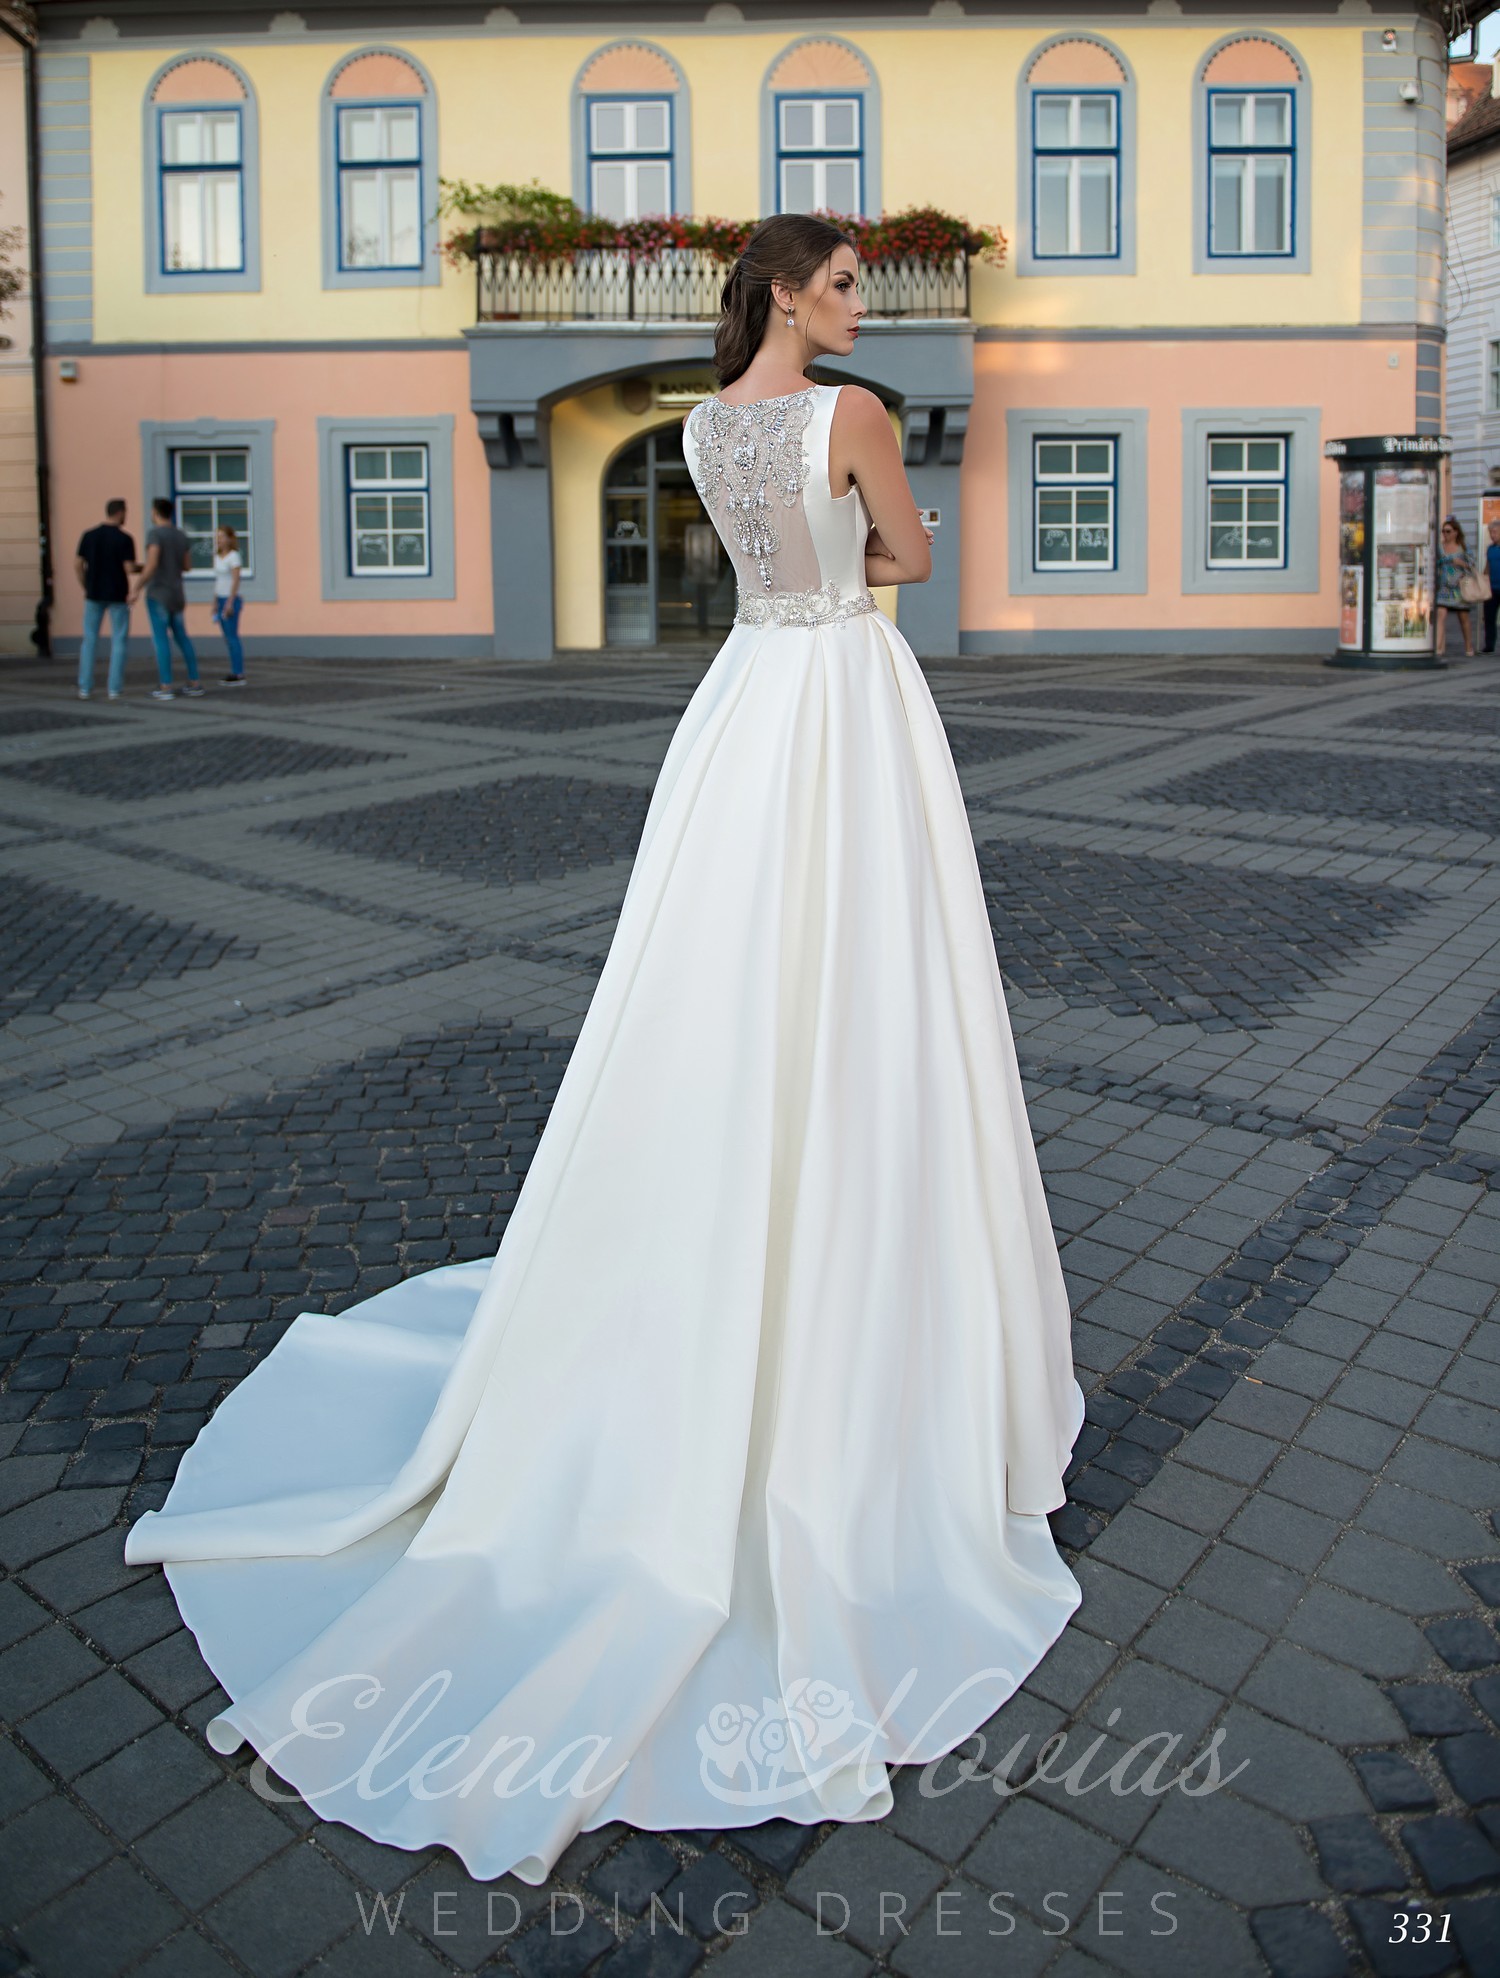 Smooth wedding dress with applique on the back